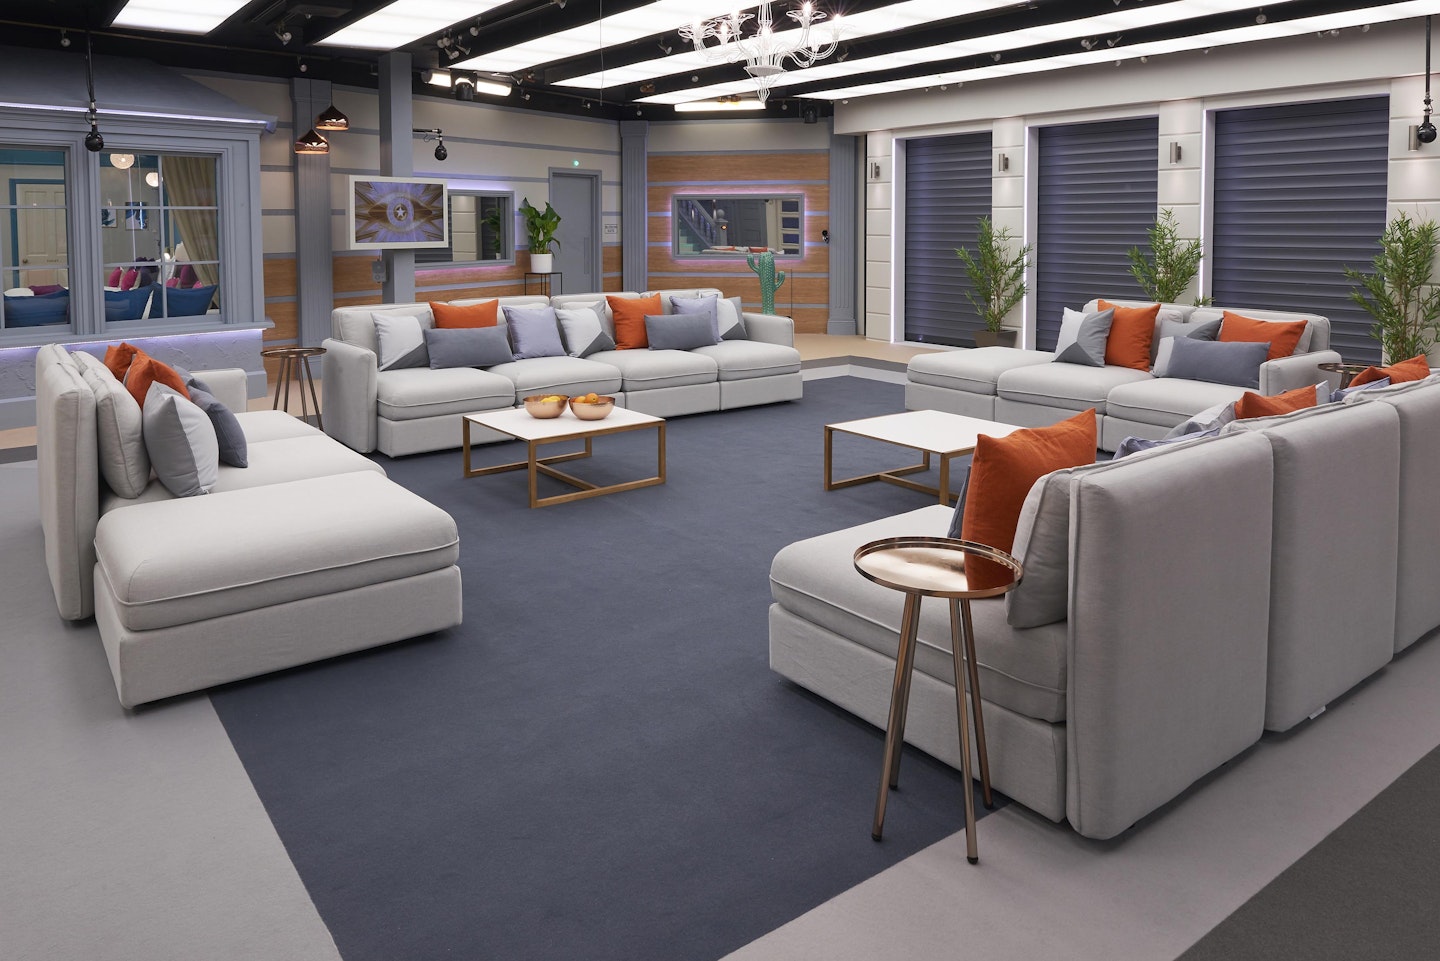 First look in the CBB house August 2017